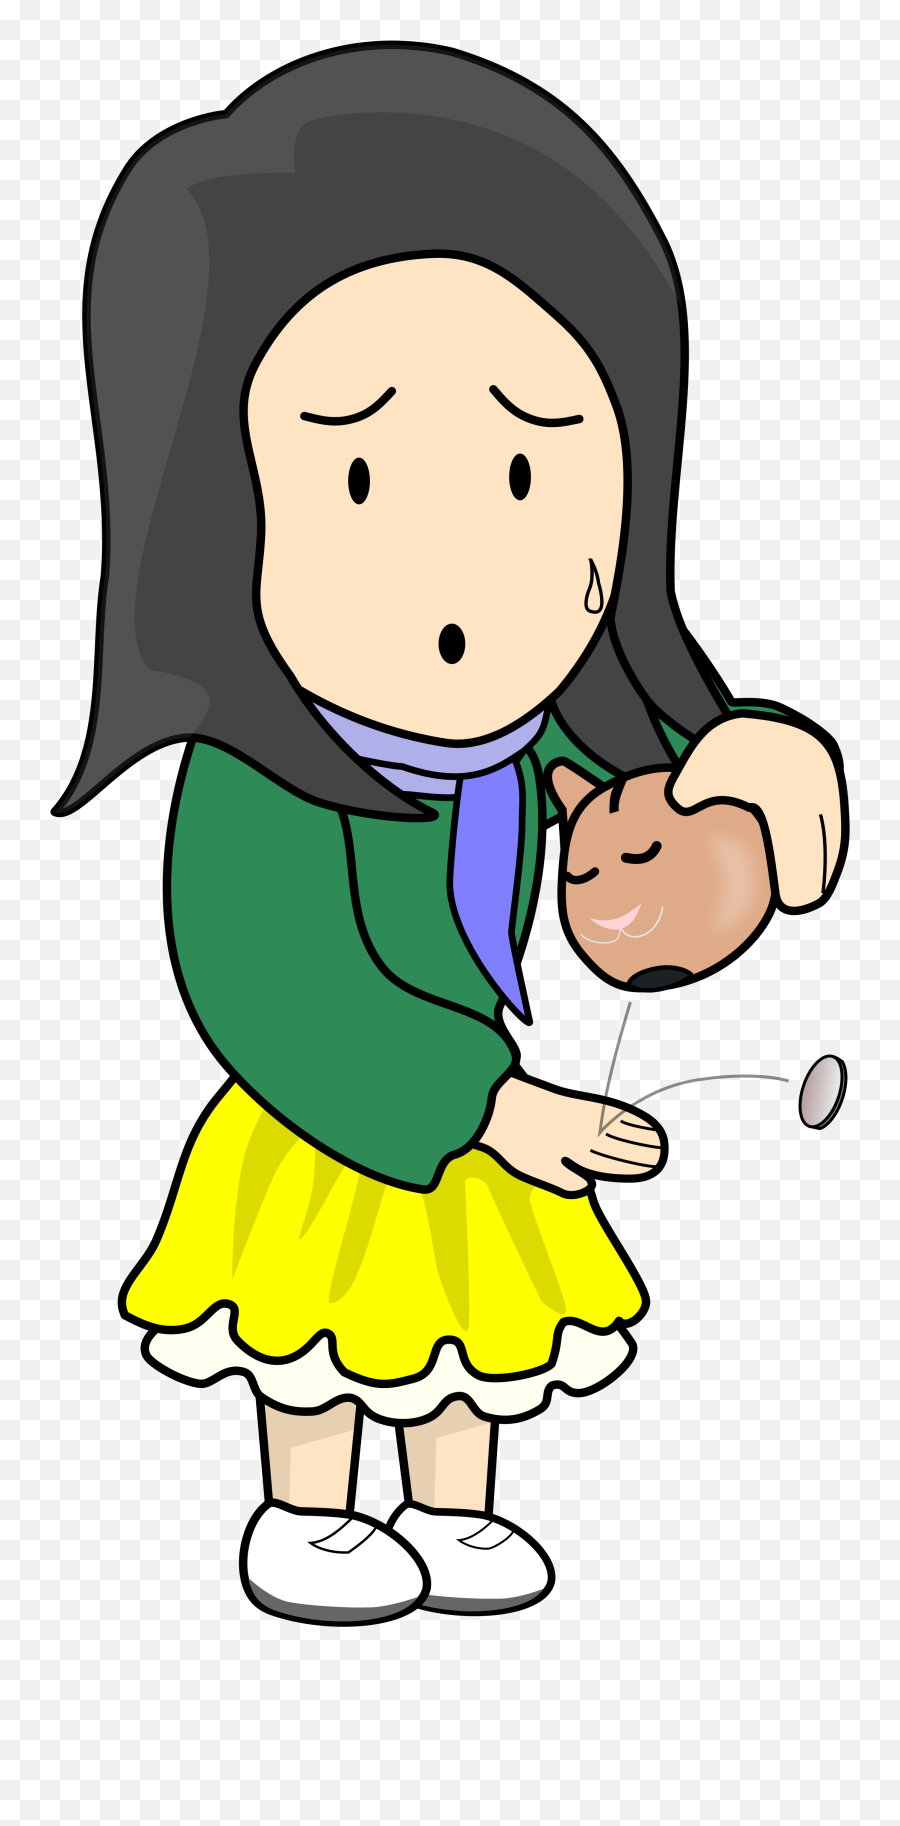 Clipart Of The Girl With No Money In The Money Box At White Emoji,Inside Clipart